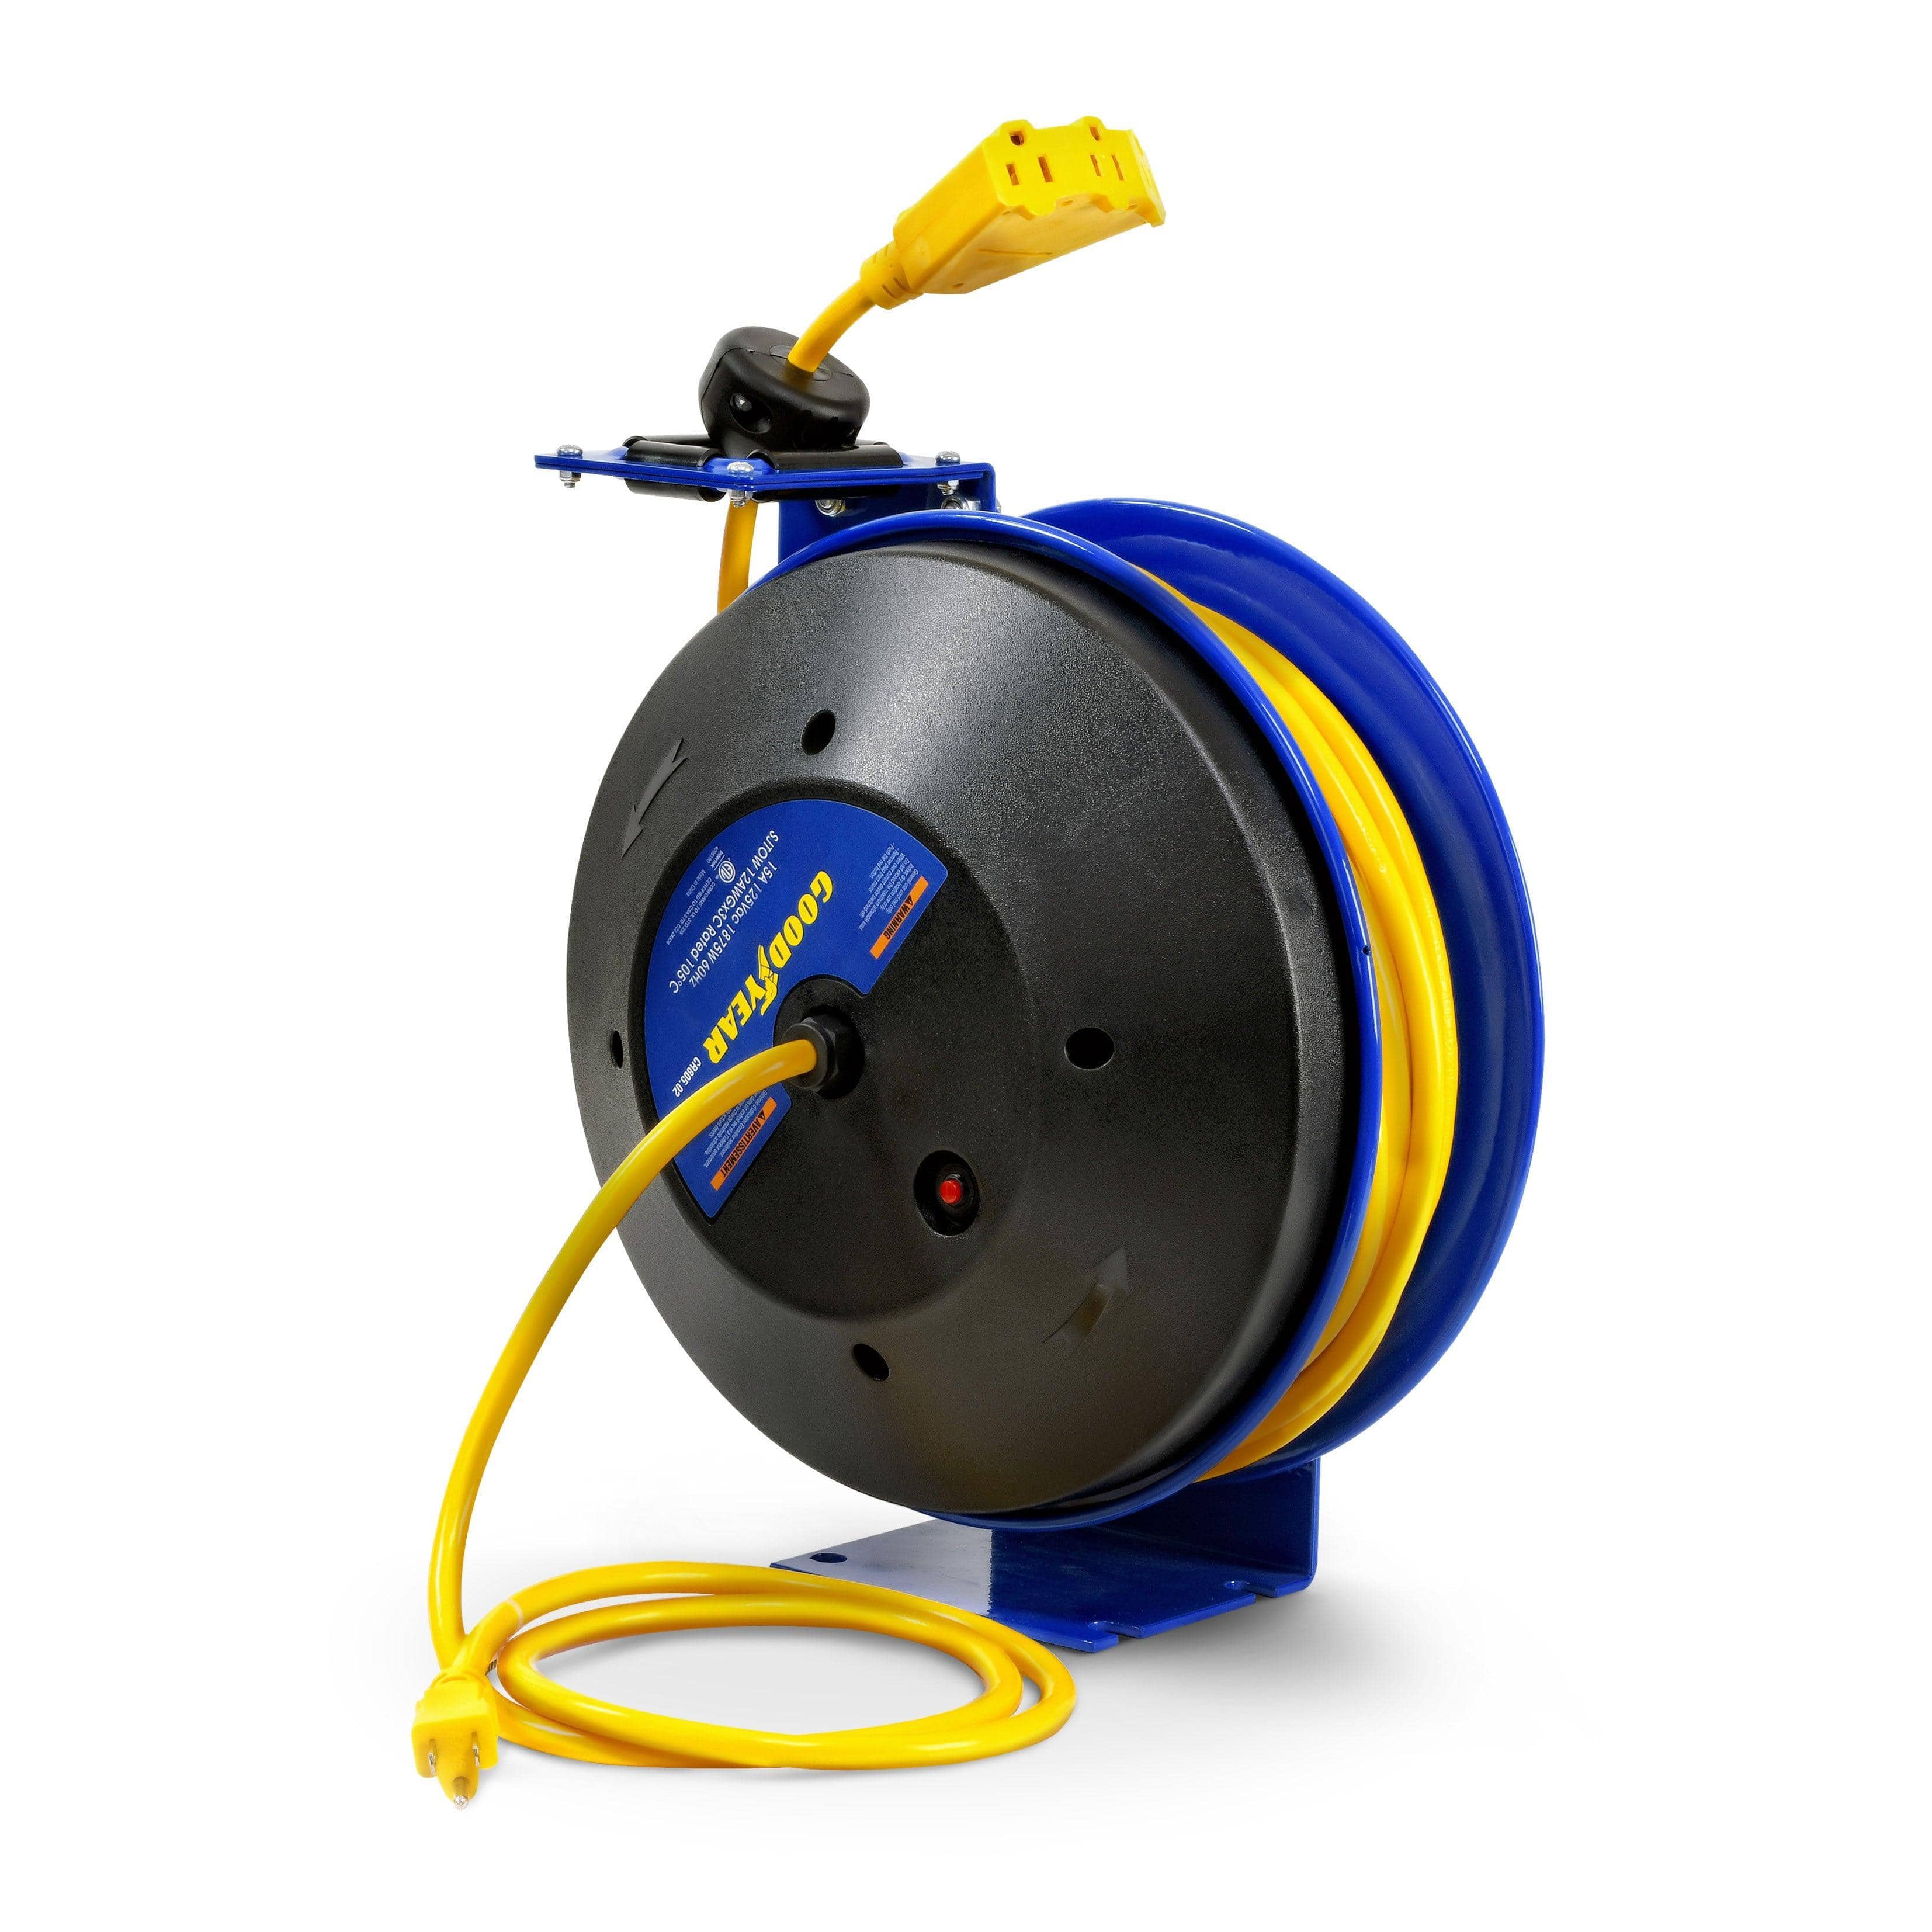 Goodyear Industrial Retractable Extension Cord Reel - 12AWG x 50